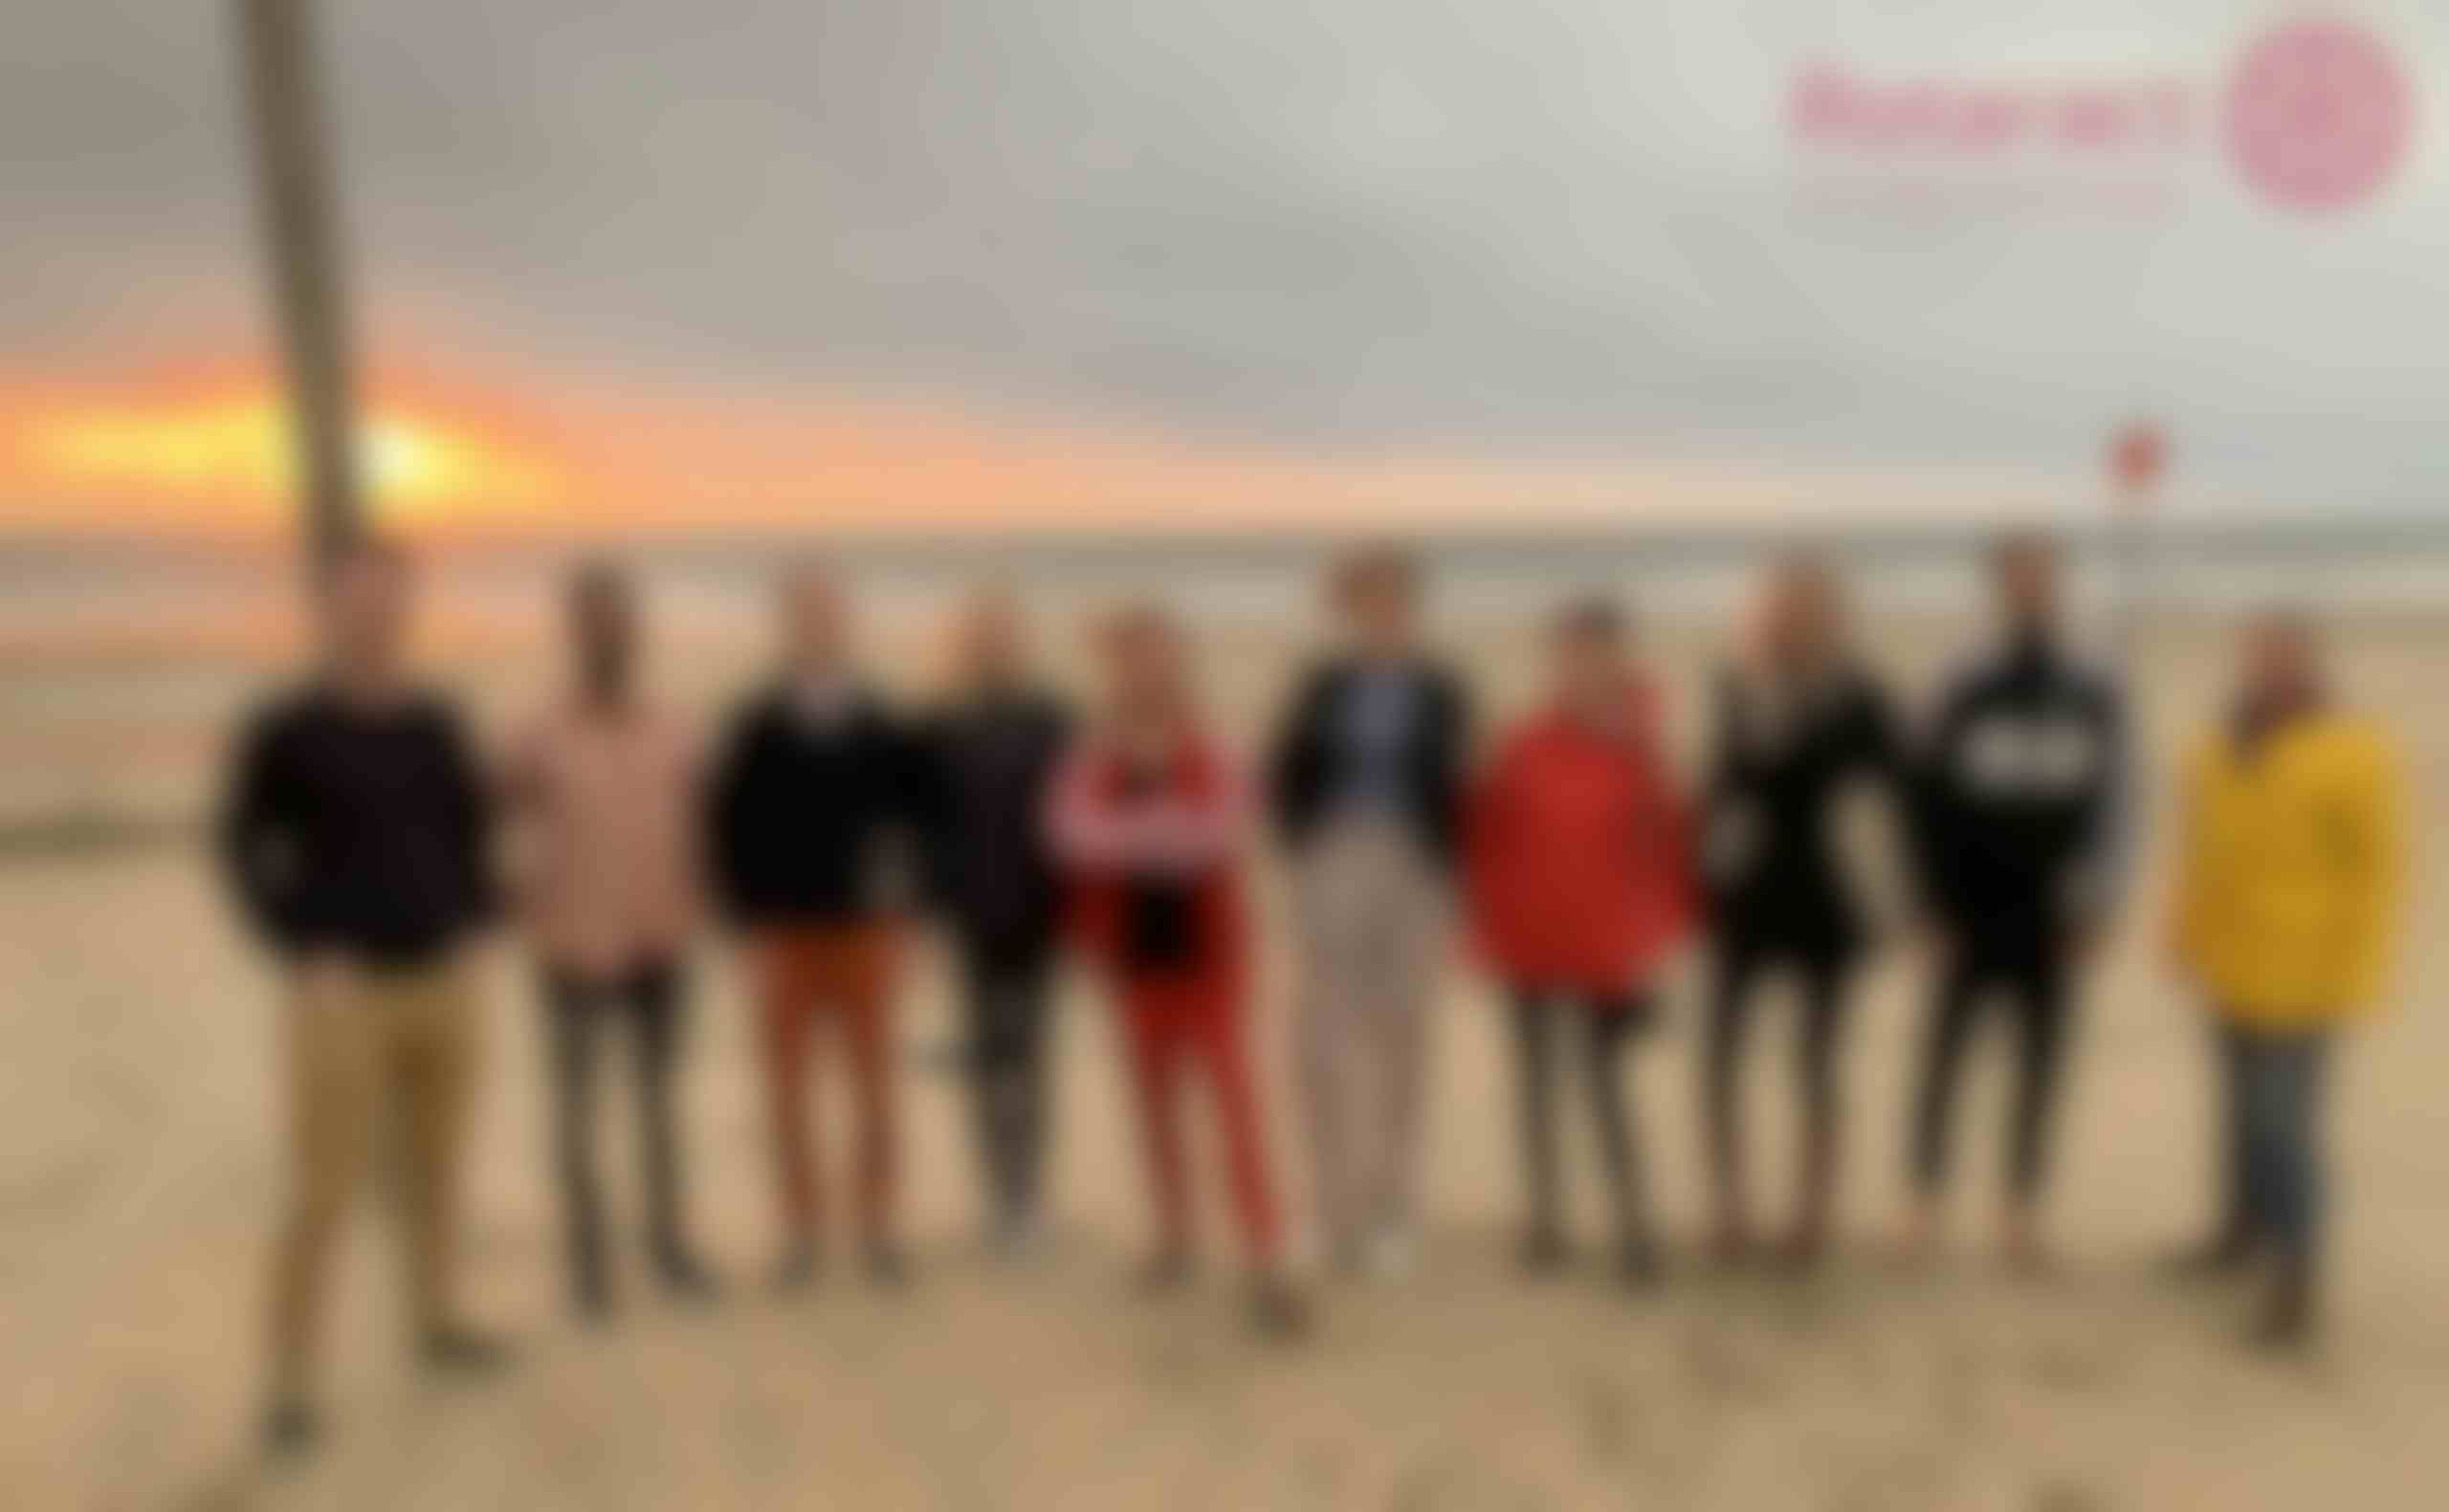 Do you know Rotaract Scheveningen? Would you like to join us?